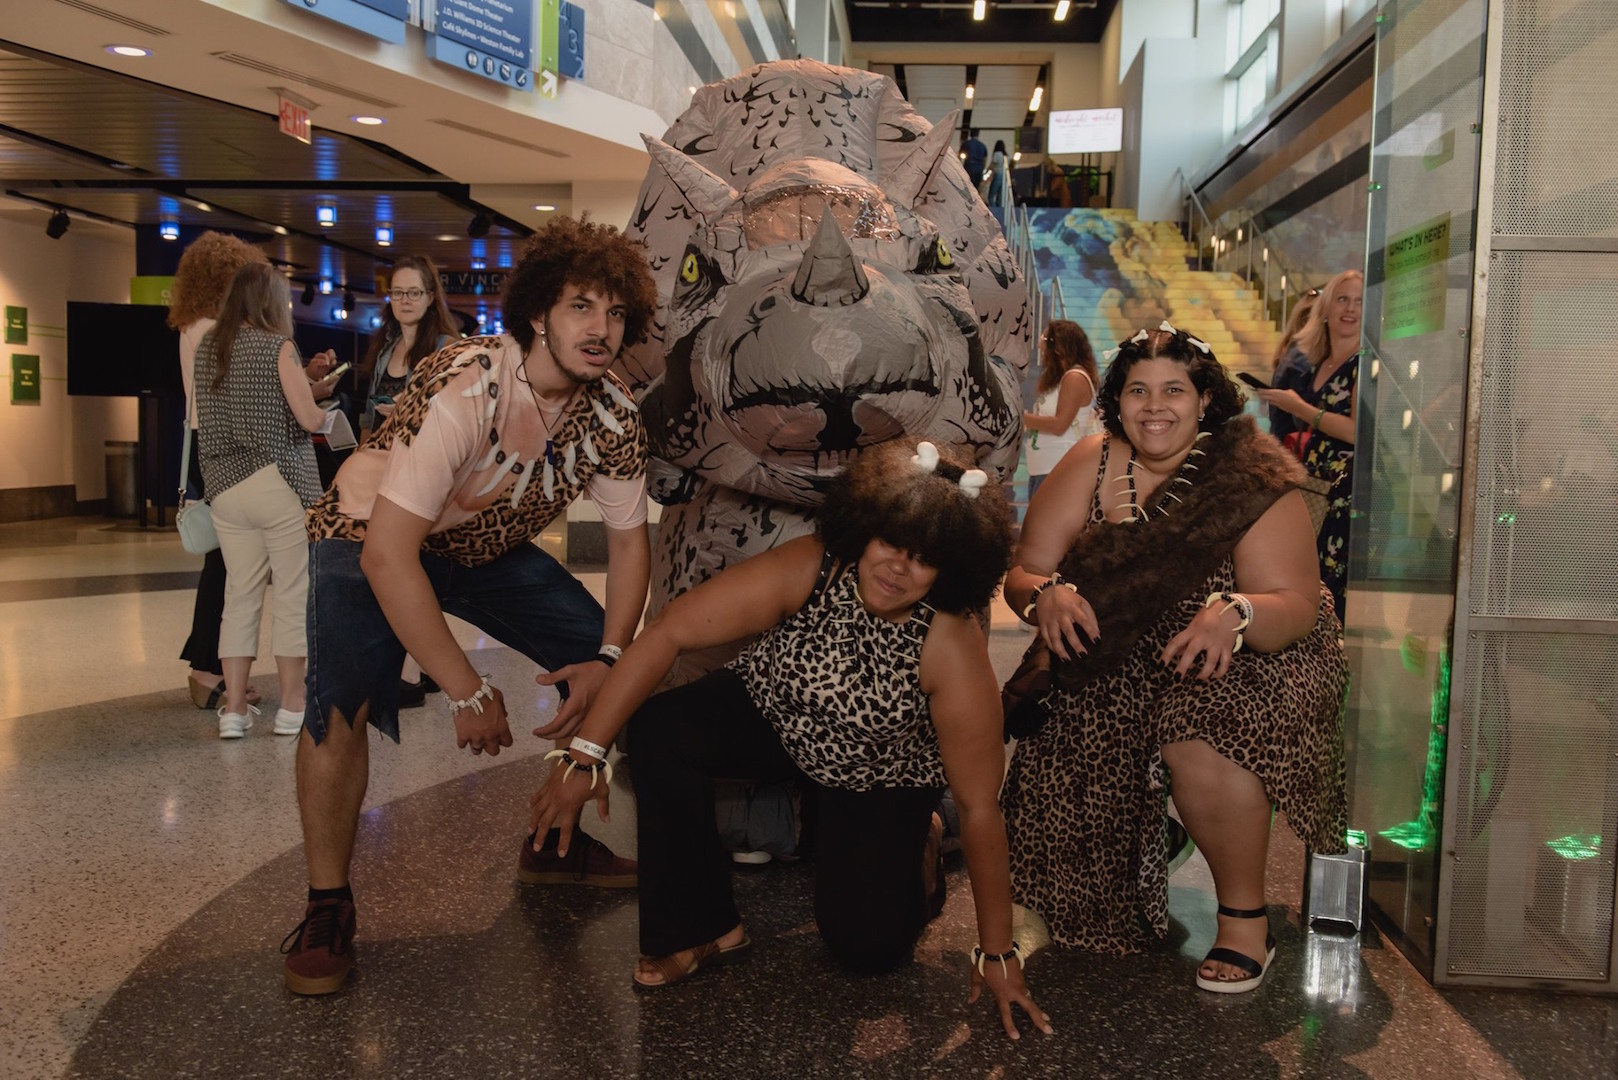 Three guests in cavemen costumes pose with a dinosaur costume character